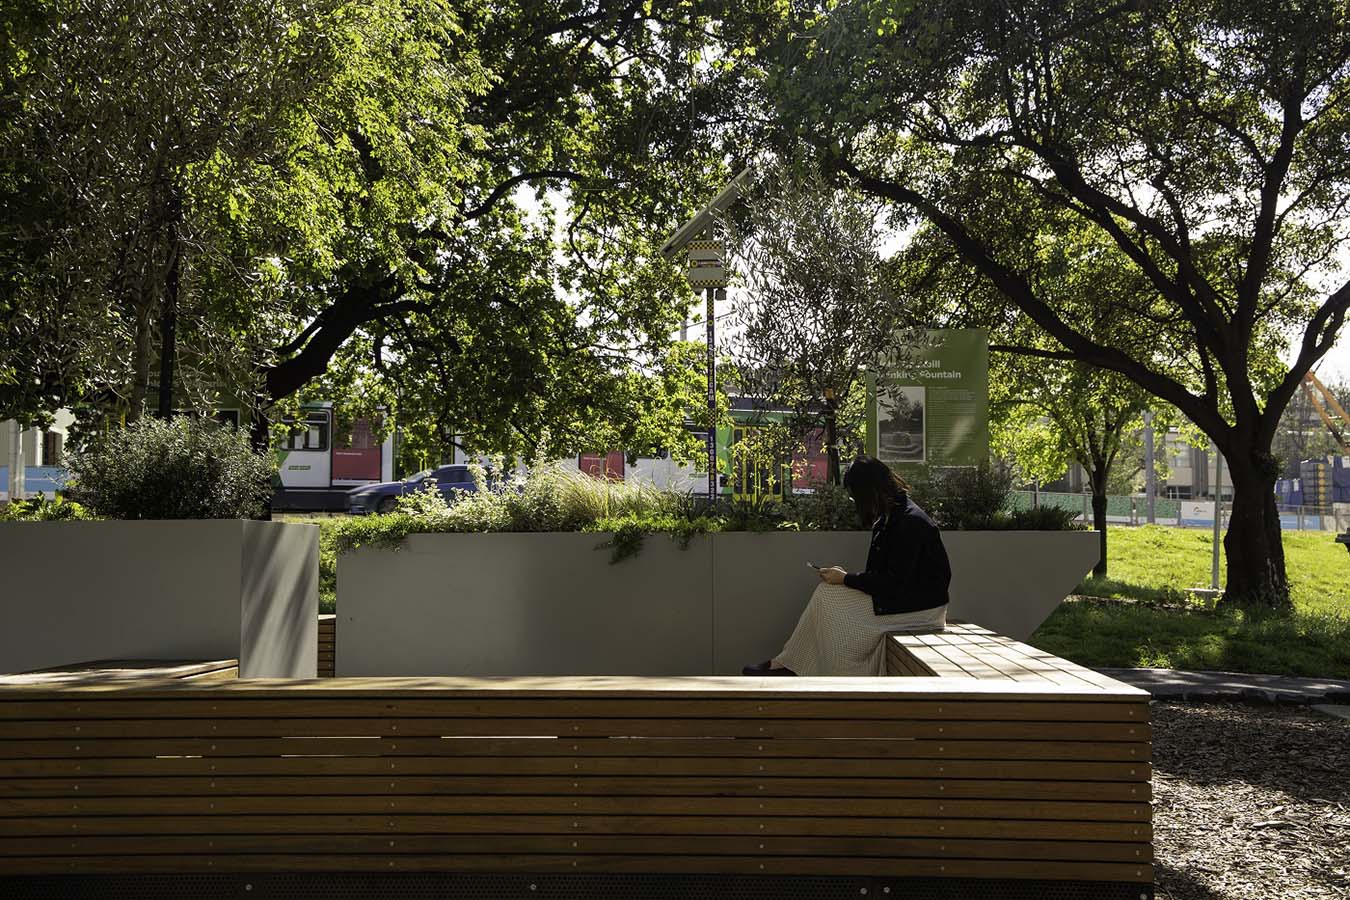 An image of a person sitting on a park bench, by planter boxes filled with plants, on a sunny day